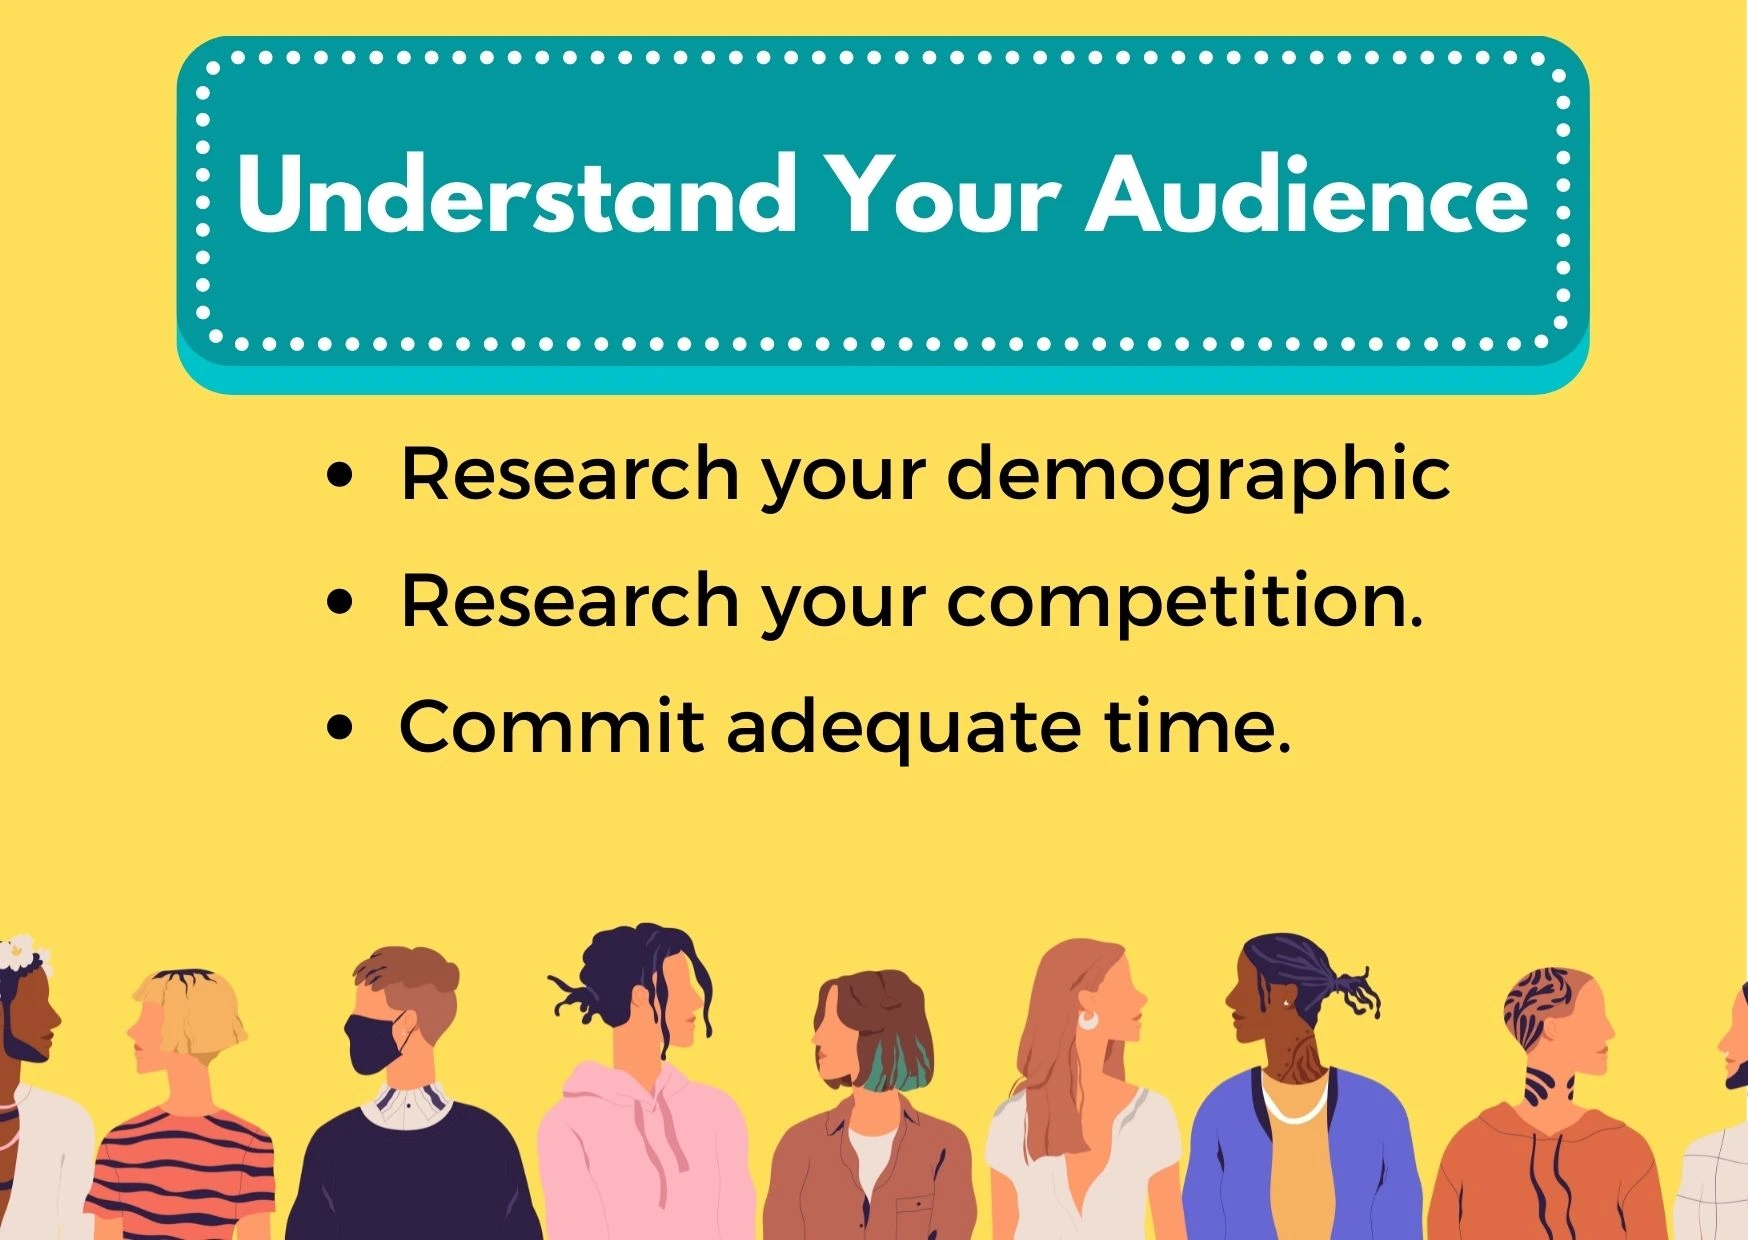 Graphic illustrating steps to take to know your audience: (1) scope out the competition (2) research your demographic (3) commit adequate time.